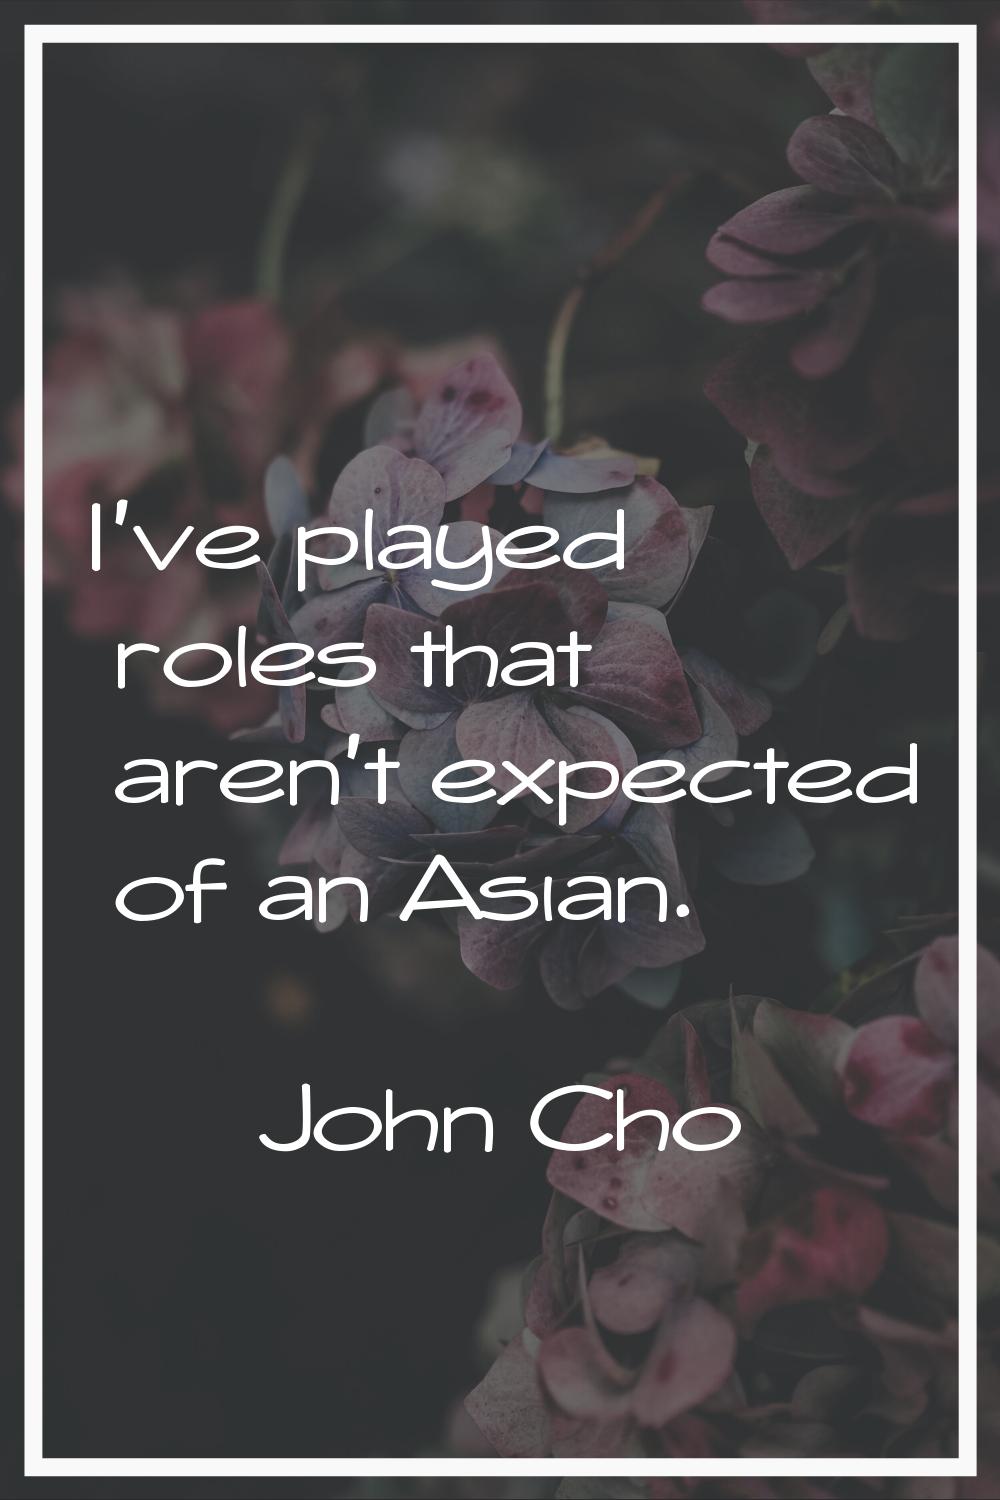 I've played roles that aren't expected of an Asian.